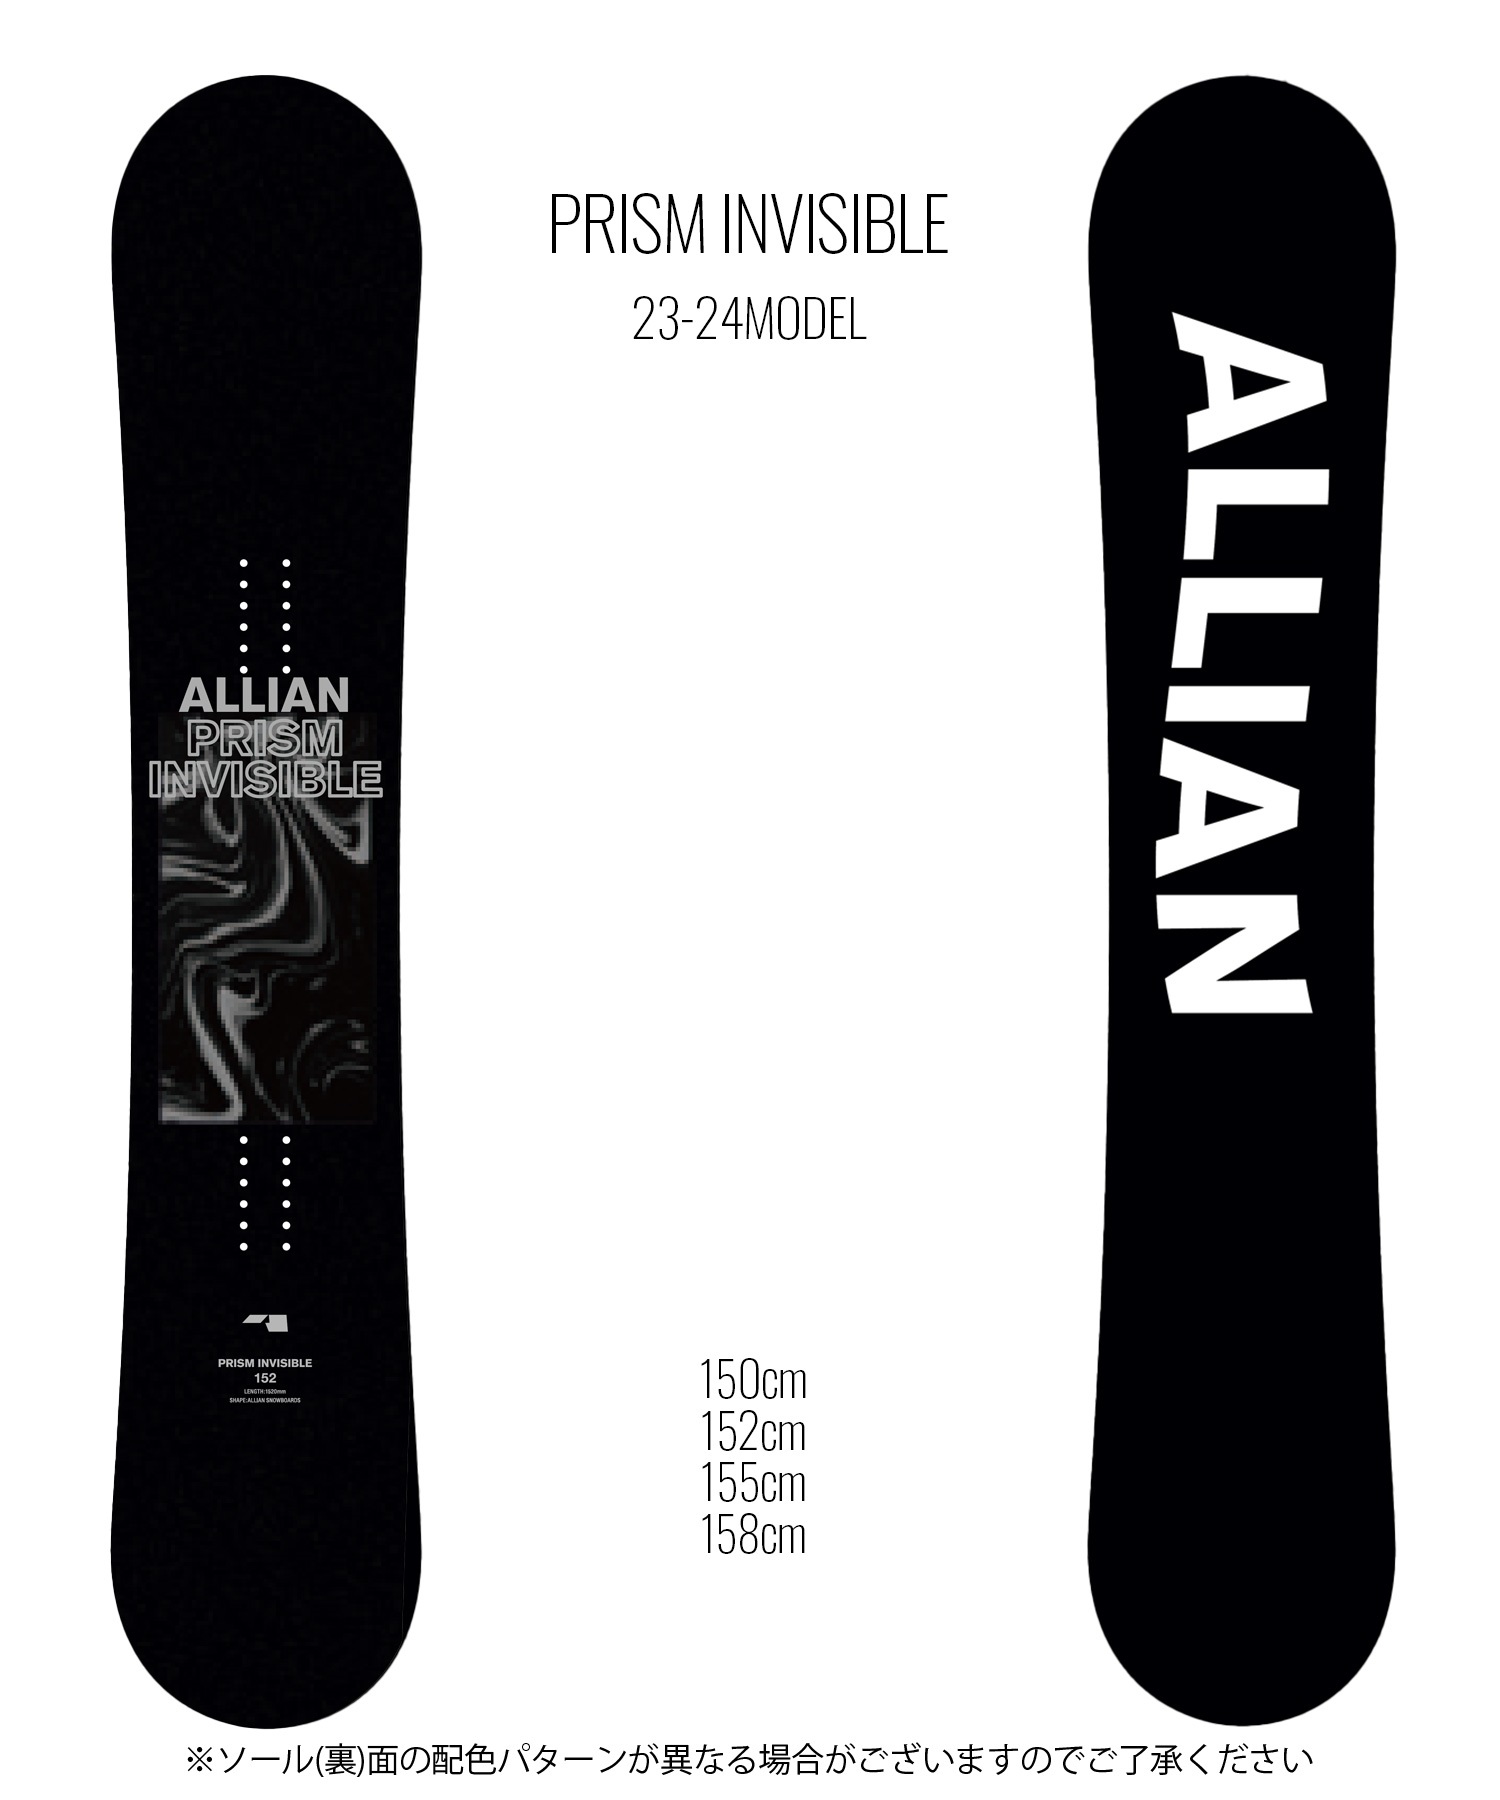 Allian prism invisible 2015-16 \u0026 flux DSウィンタースポーツ